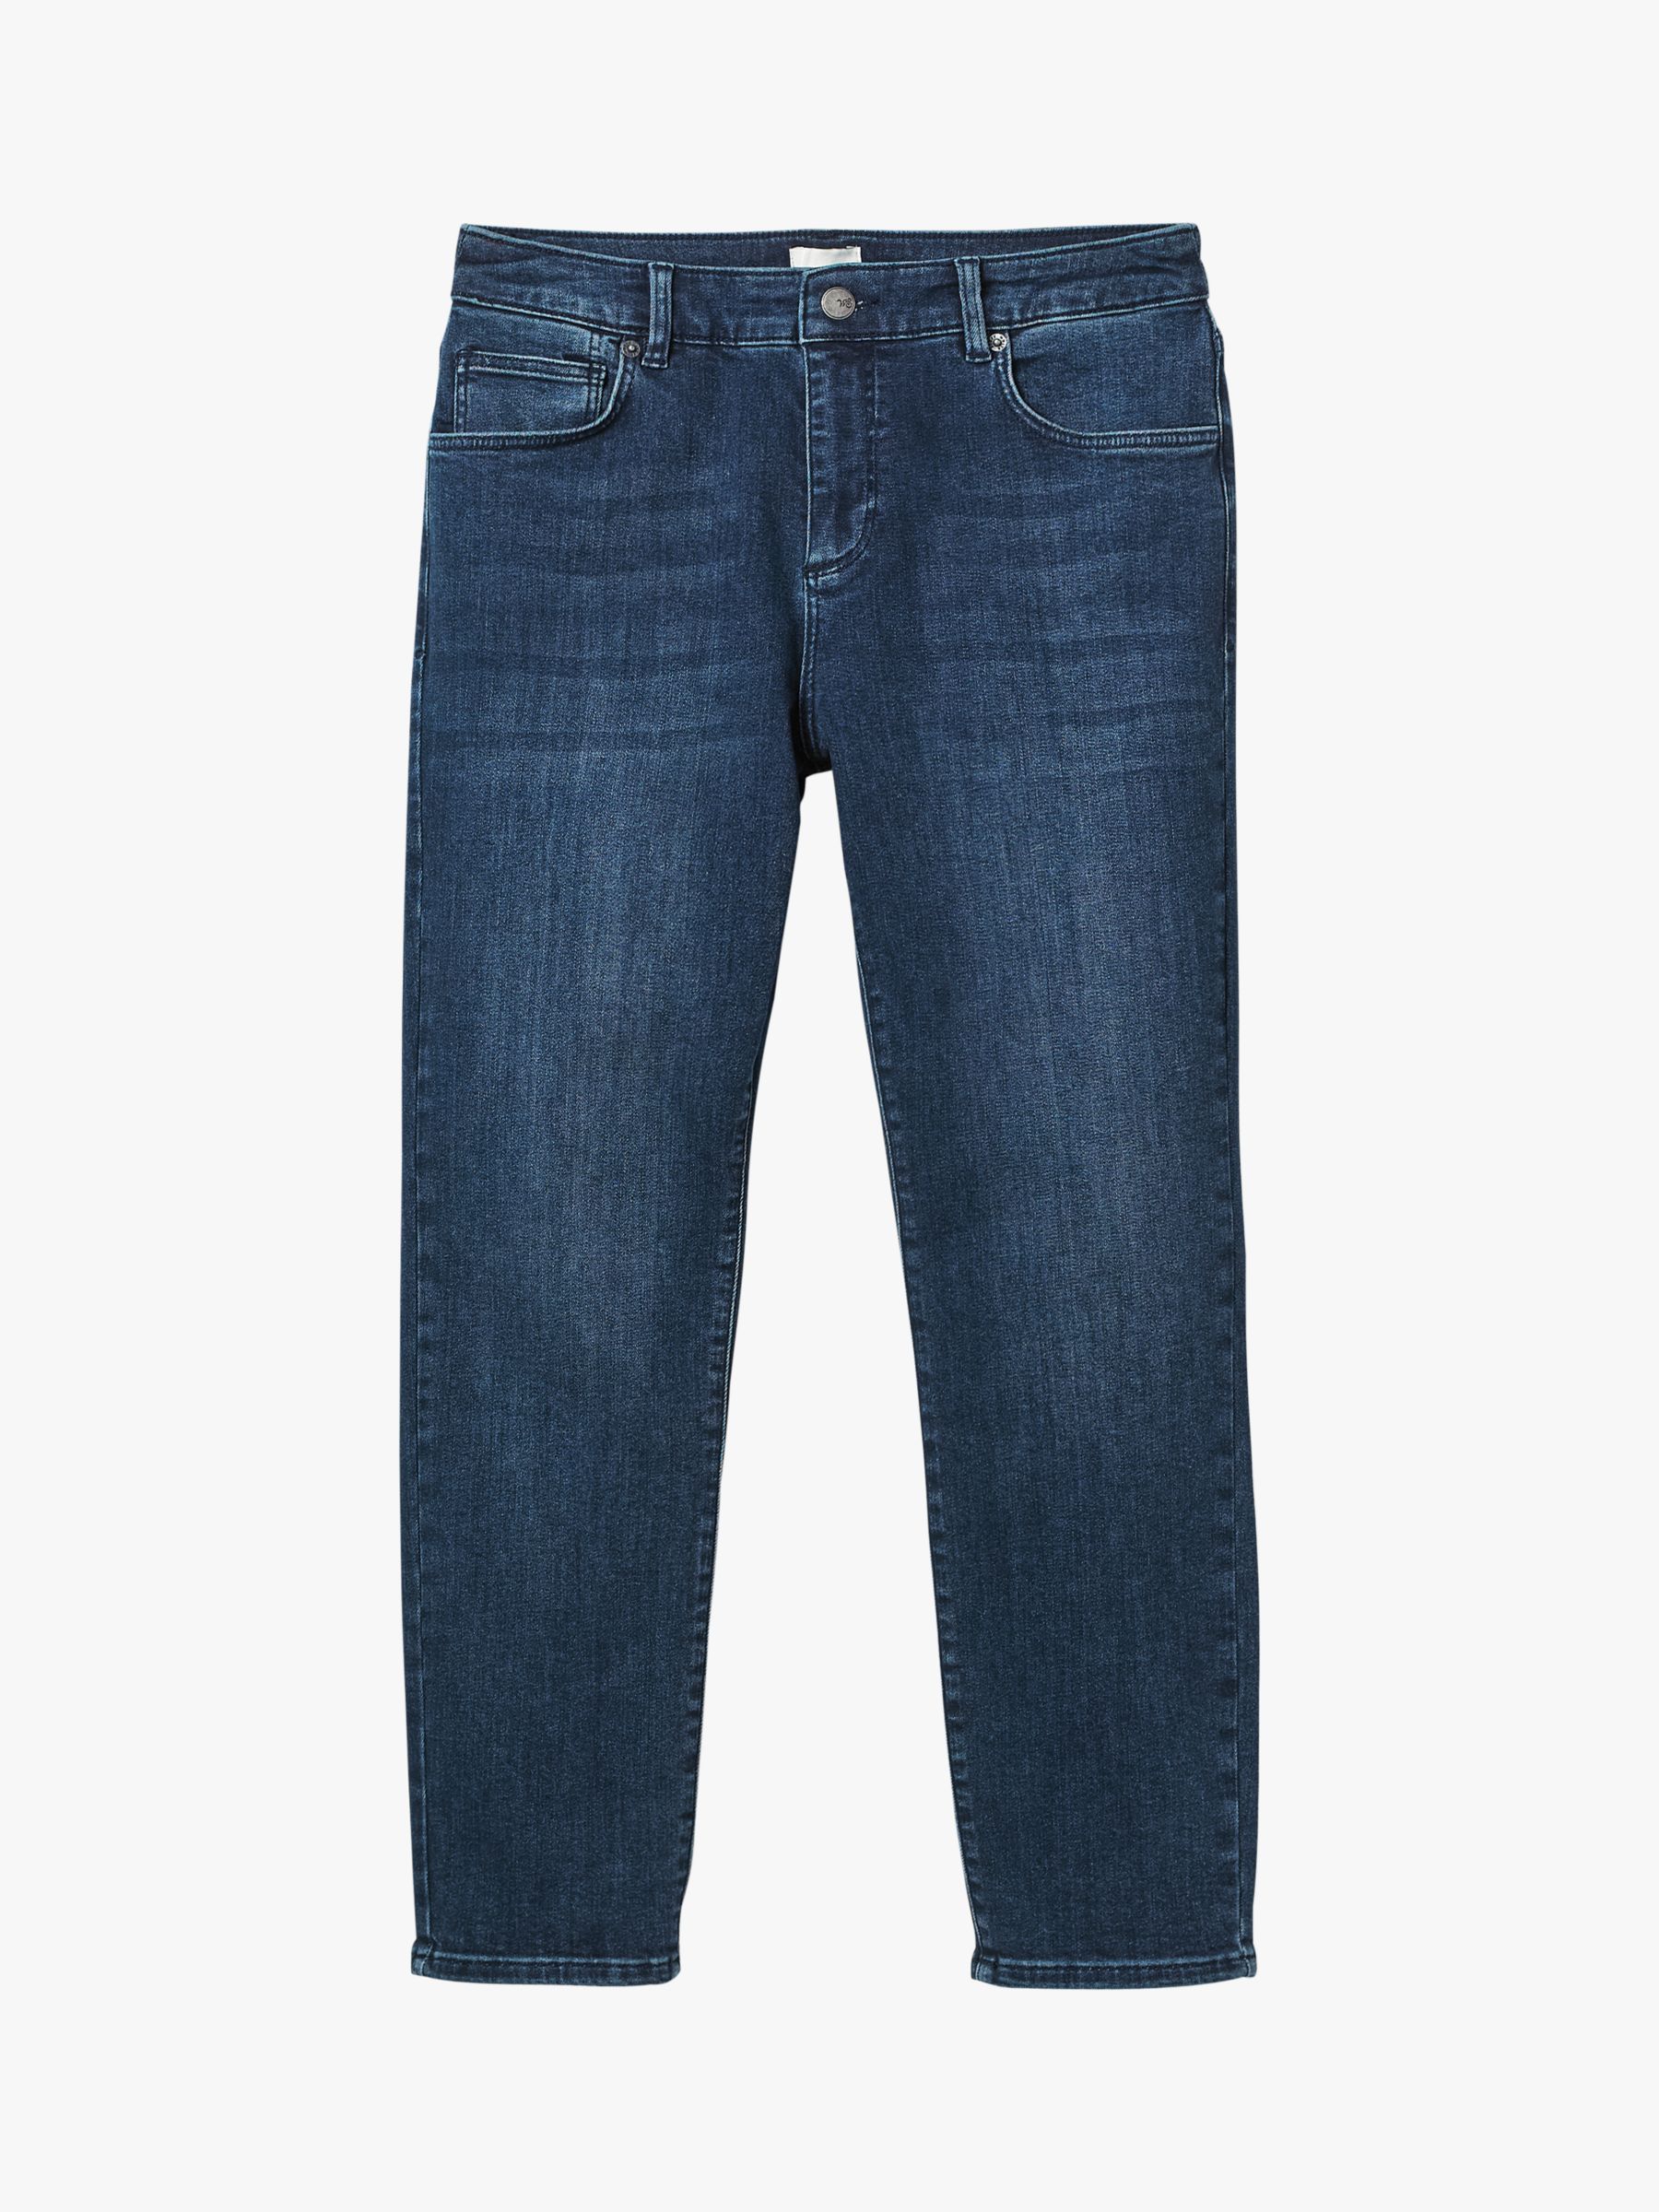 White Stuff Straight Cropped Jeans, Mid Denim at John Lewis & Partners